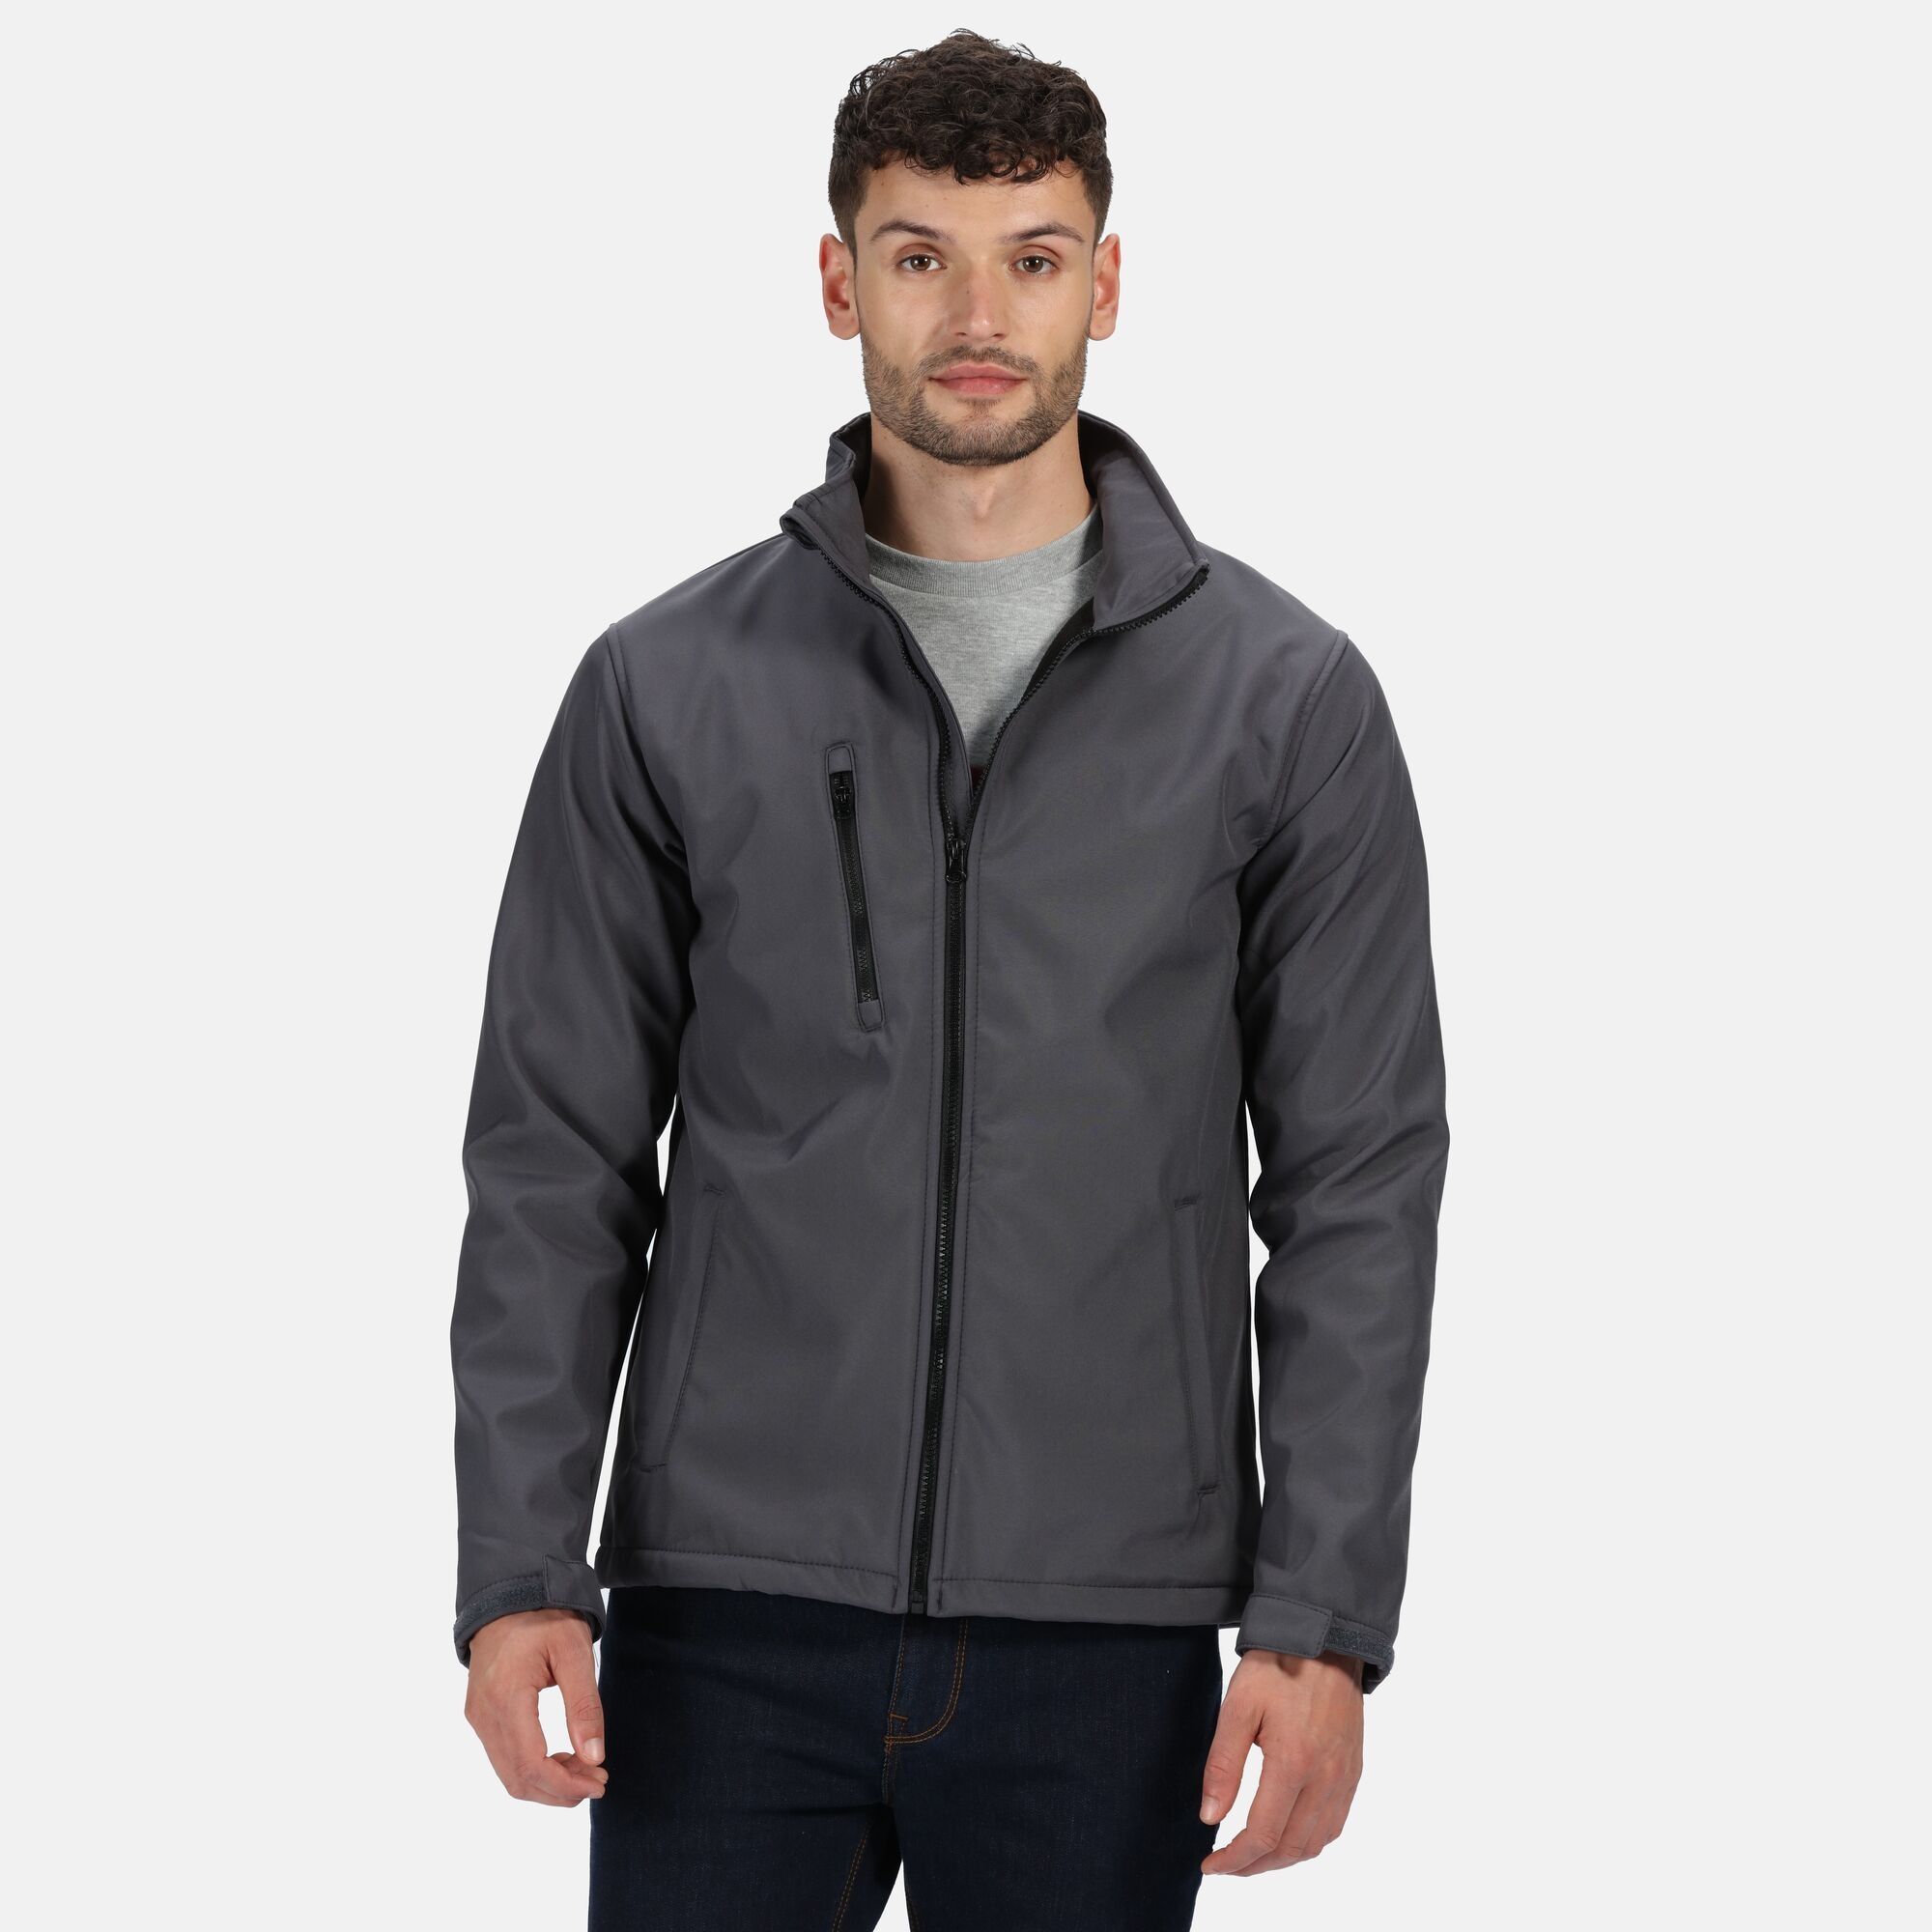 Material: 100% polyester. Warm backed woven. Softshell XPT waterproof and breathable 3 layer membrane fabric. Wind resistant membrane fabric. Atl durable water repellent finish. 2 zipped lower pockets. Zipped chest pocket. Chest sizes to fit: (S): 94-96.5cm, (M): 99-101.5cm, (L): 104-106.5cm, (XL): 109-112cm, (XXL): 117-122cm, (3XL): 124.5-129.5cm.